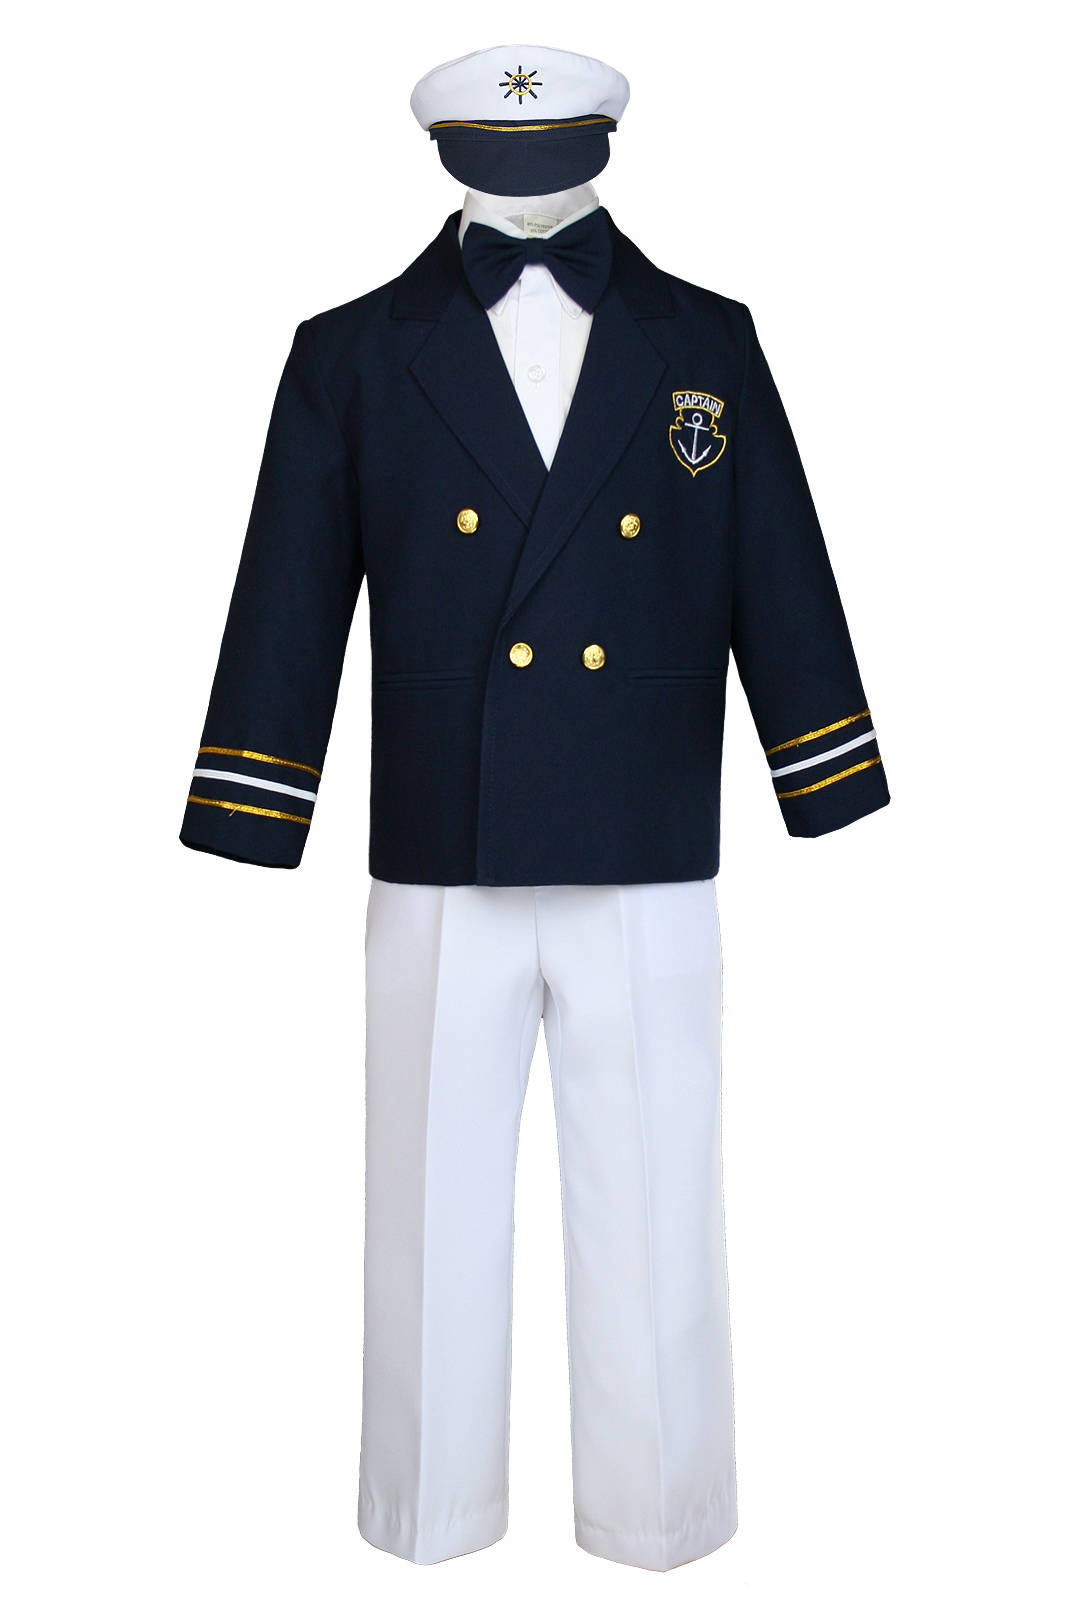 S M L XL 3T 4T New Baby & Toddler Formal Party Nautical Sailor Suit Outfits SZ 